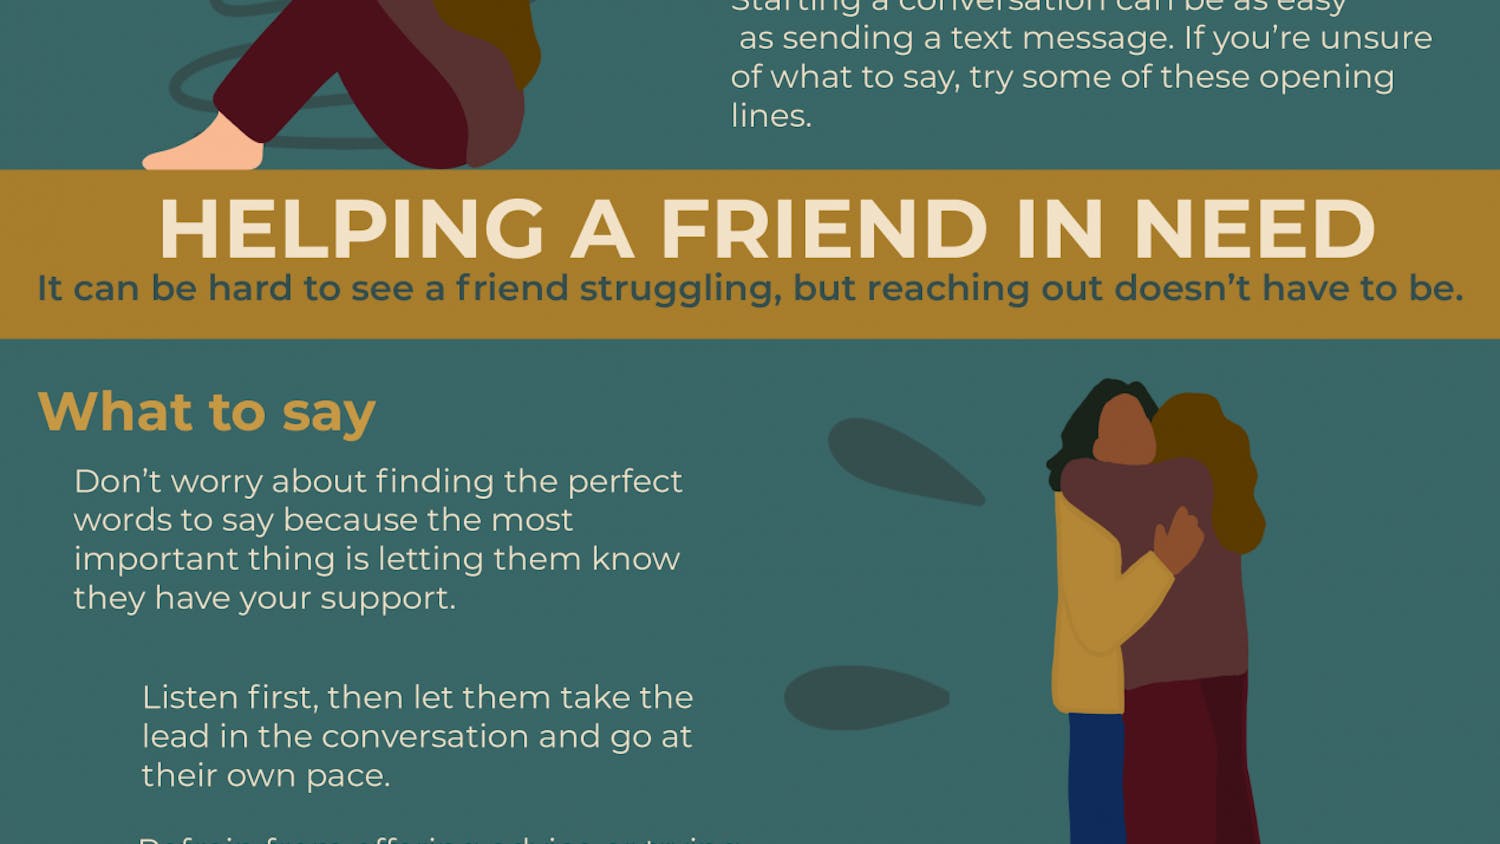 It can be difficult to see a friend struggling with mental health, but by initiating a conversation and being a good listener, anyone can help a friend in need.&nbsp;